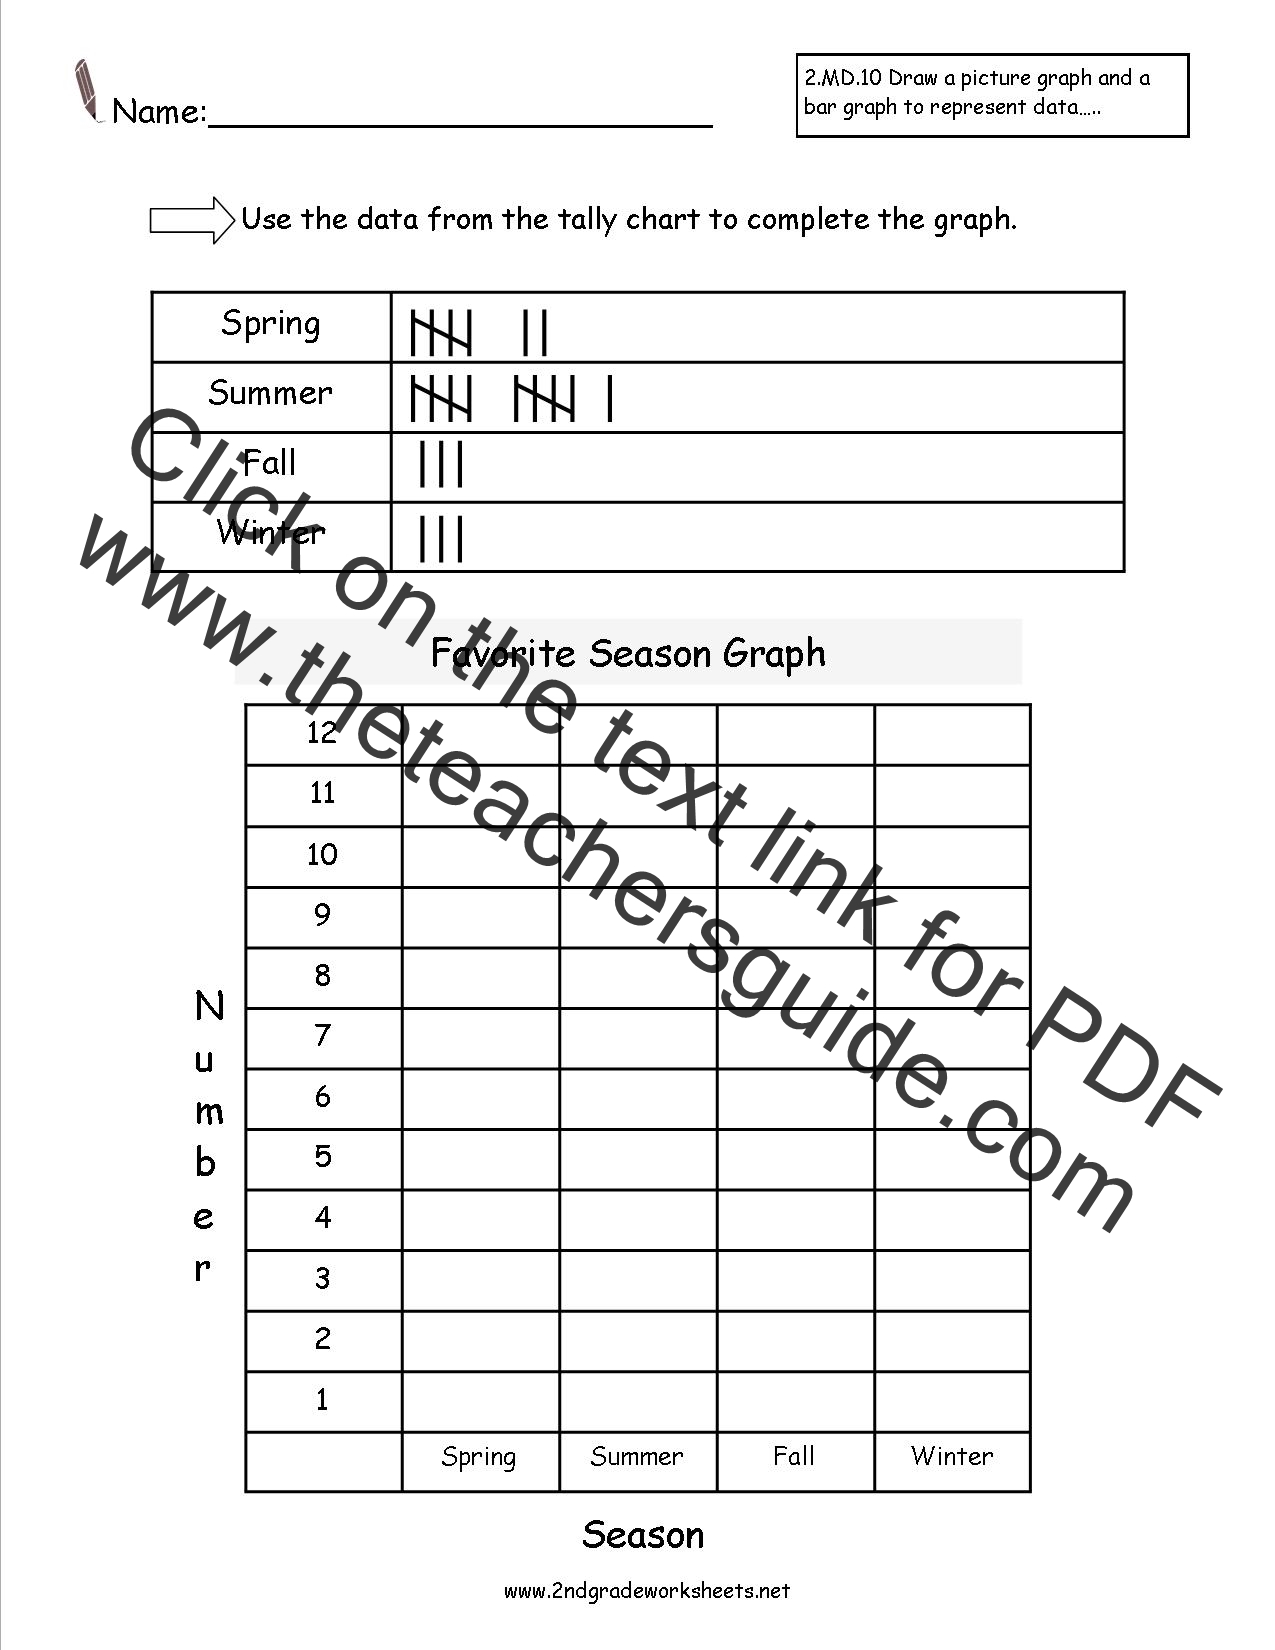 Make Your Own Tally Chart